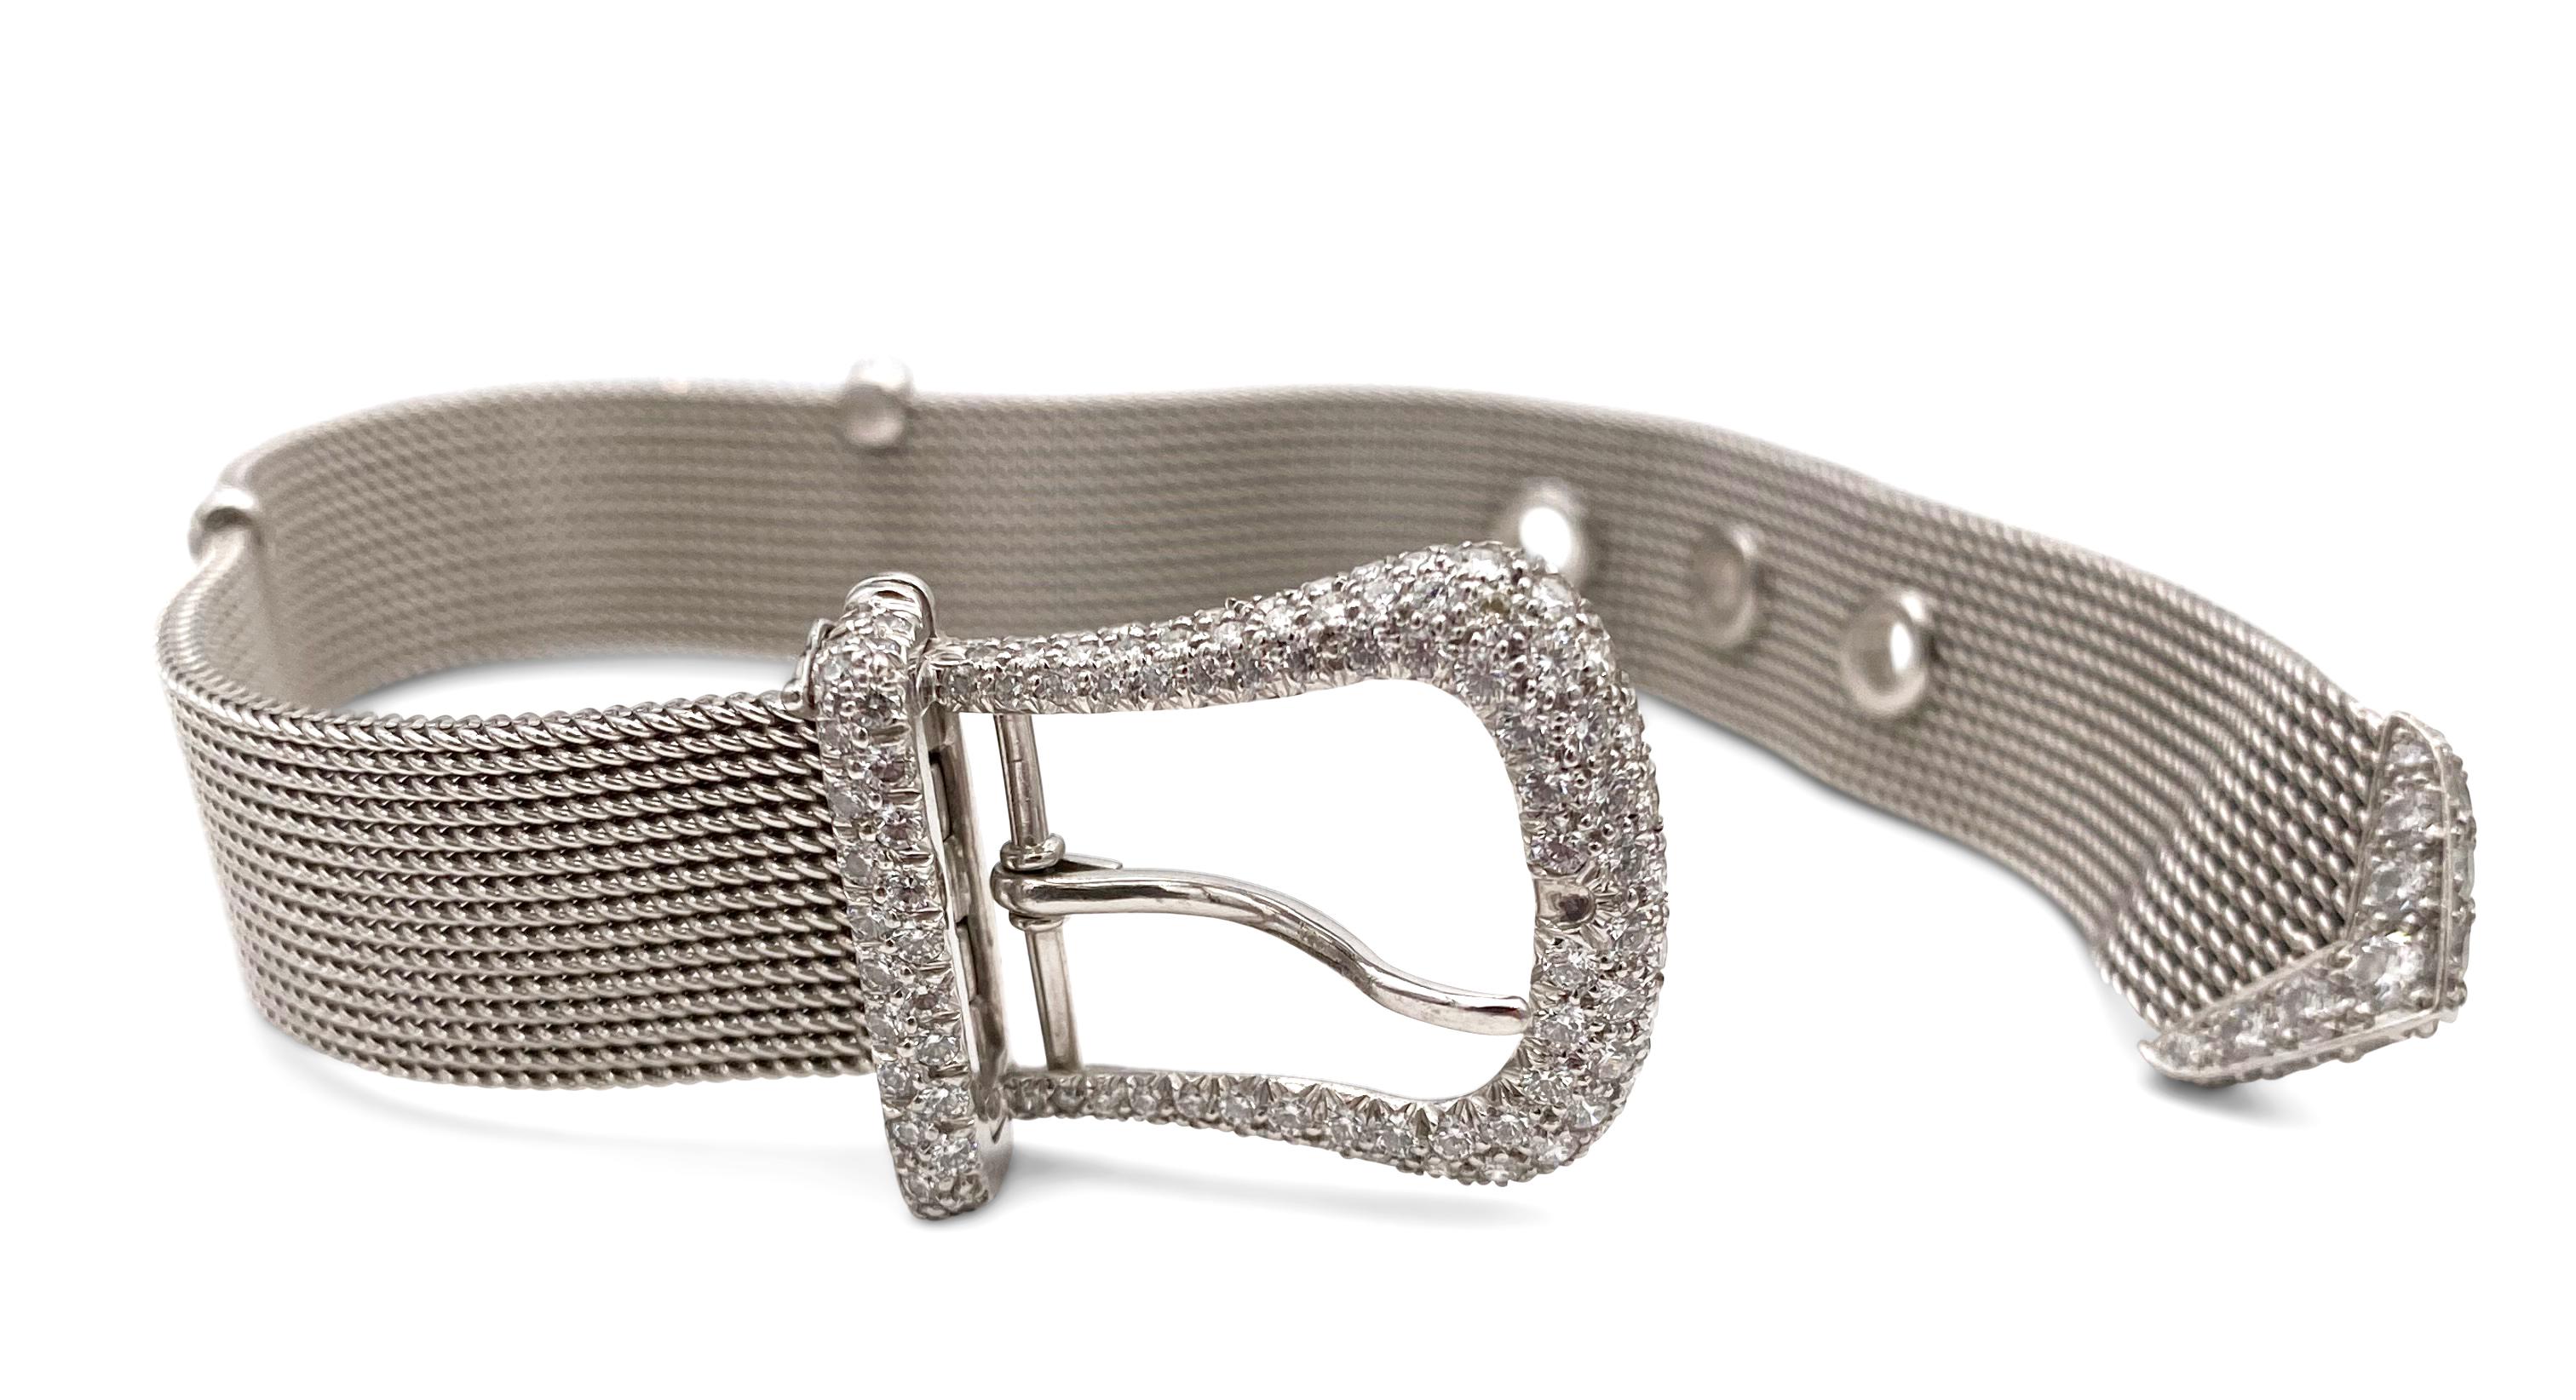 Authentic Tiffany & Co. buckle bracelet crafted in platinum and set with approx. 2.65 carats of round brilliant cut diamonds (F in color, VS clarity). The bracelet is 8 inches in length. Signed Tiffany & Co., 1997, PT 950. The bracelet comes with